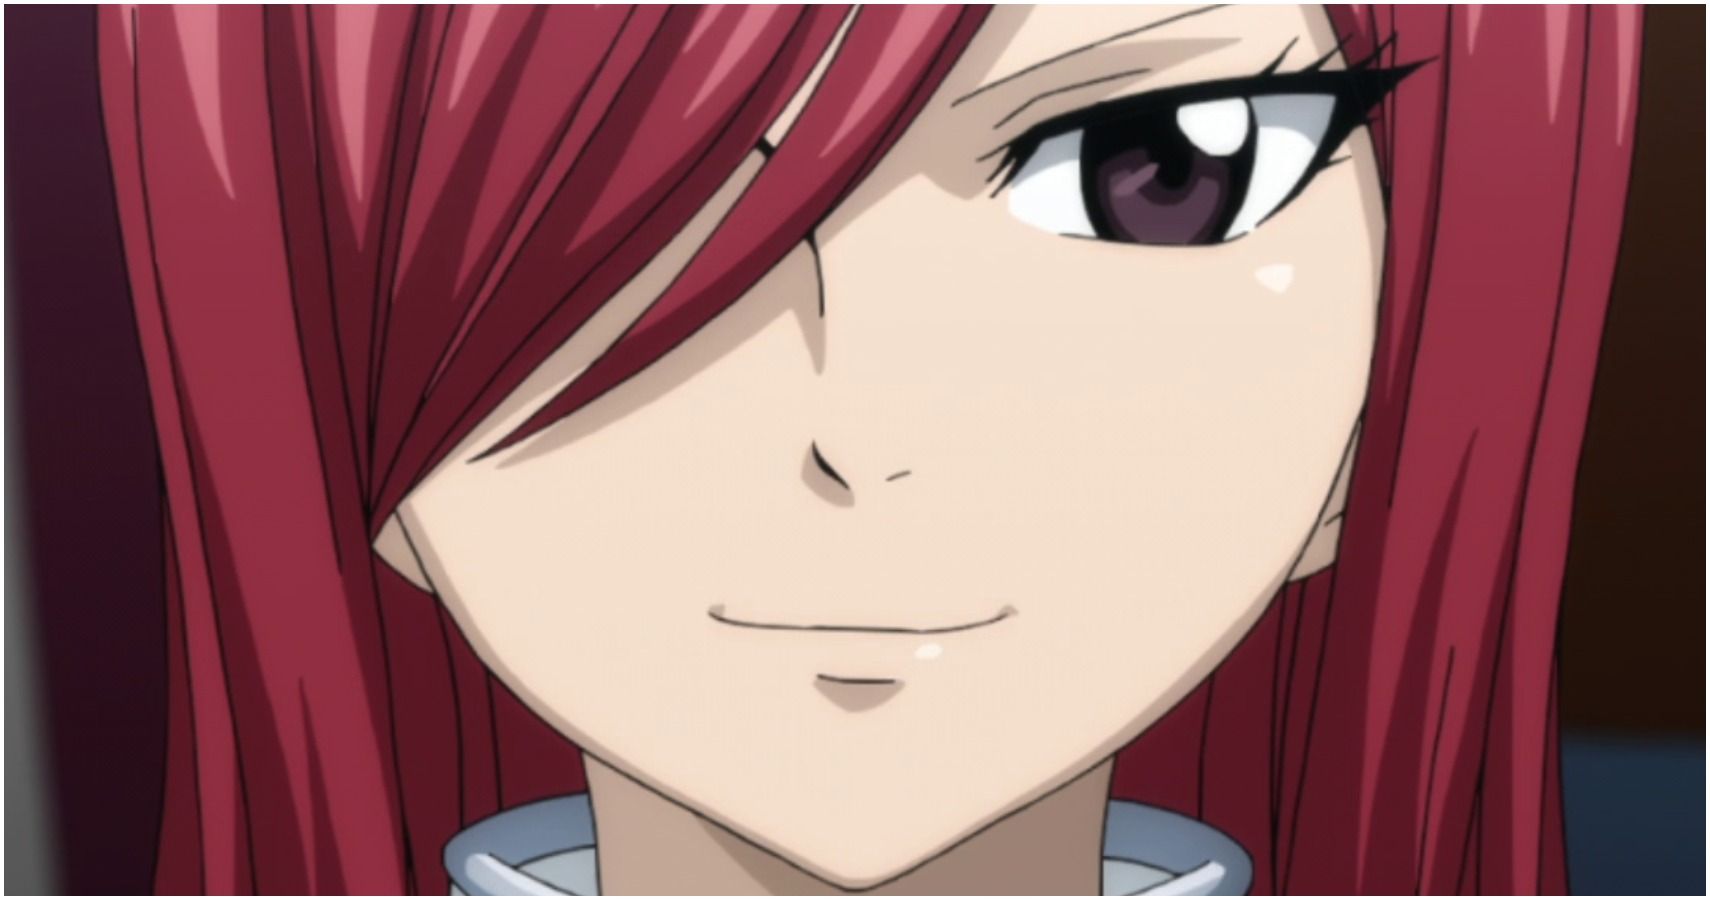 Erza Scarlet from Fairy Tail face